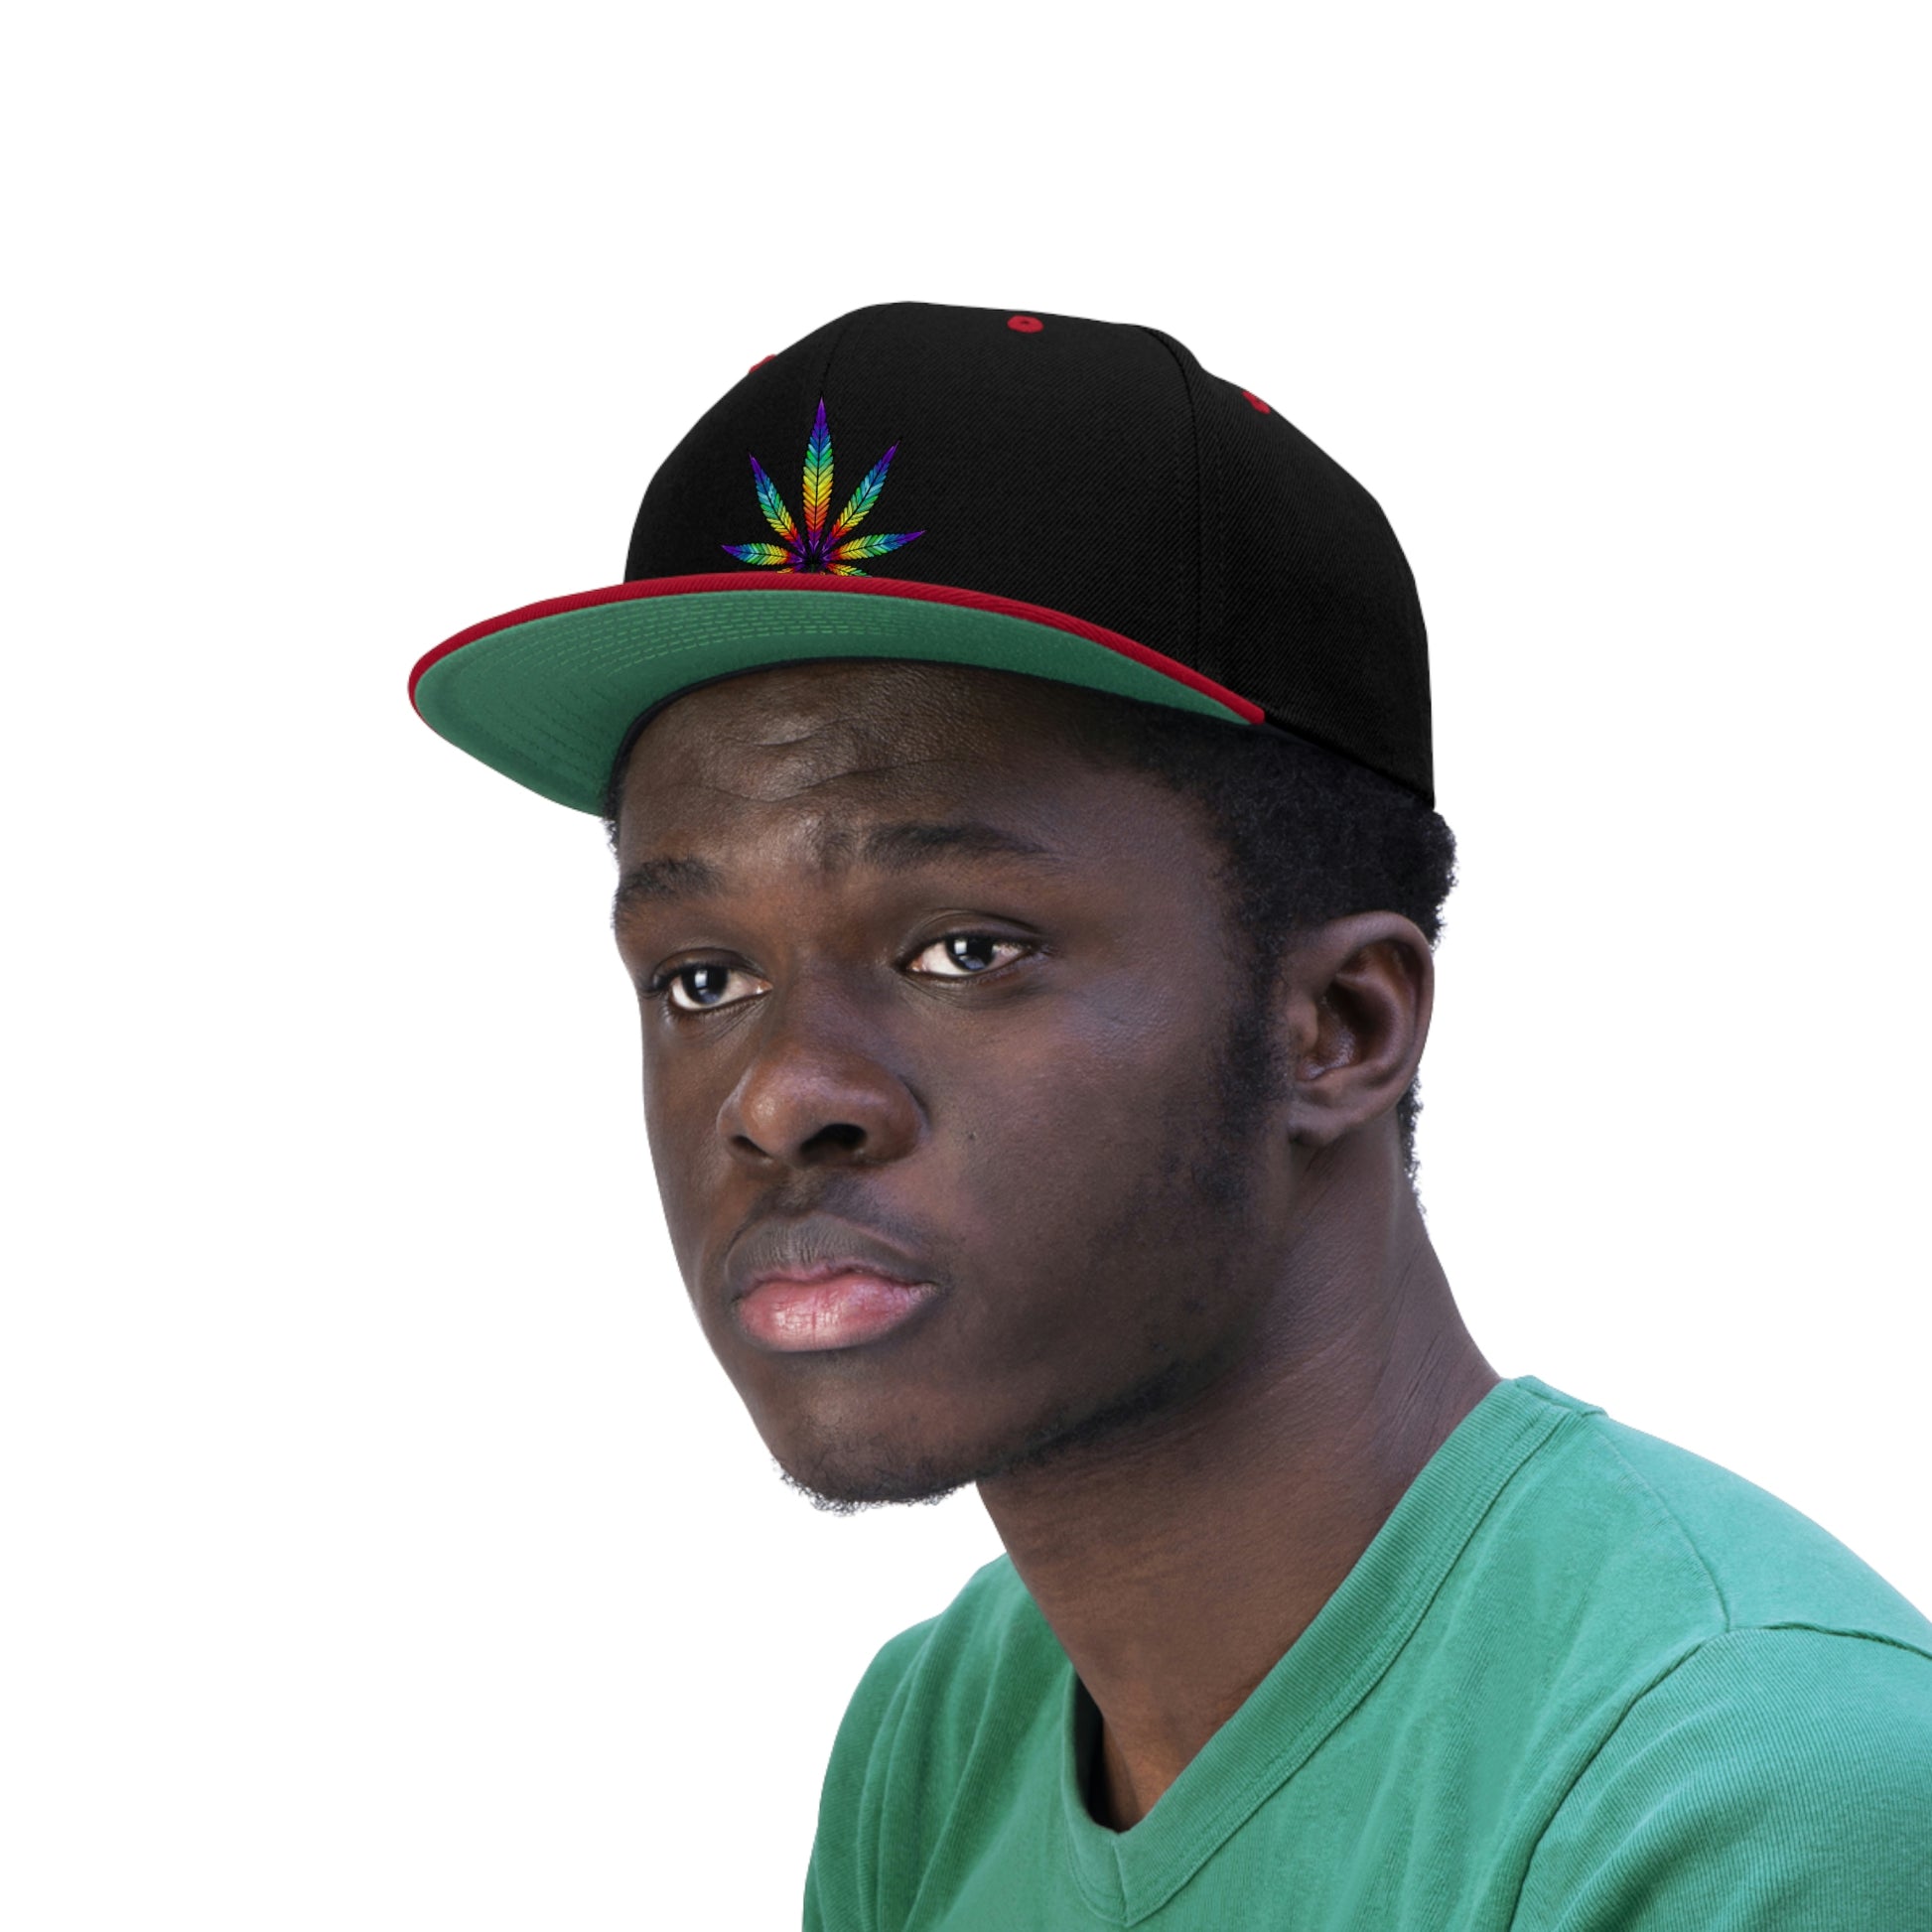 A young man looks awesome with the red and black Rainbow Marijuana Leaf Snapback Hat with a green underbill and a matching green t-shirt